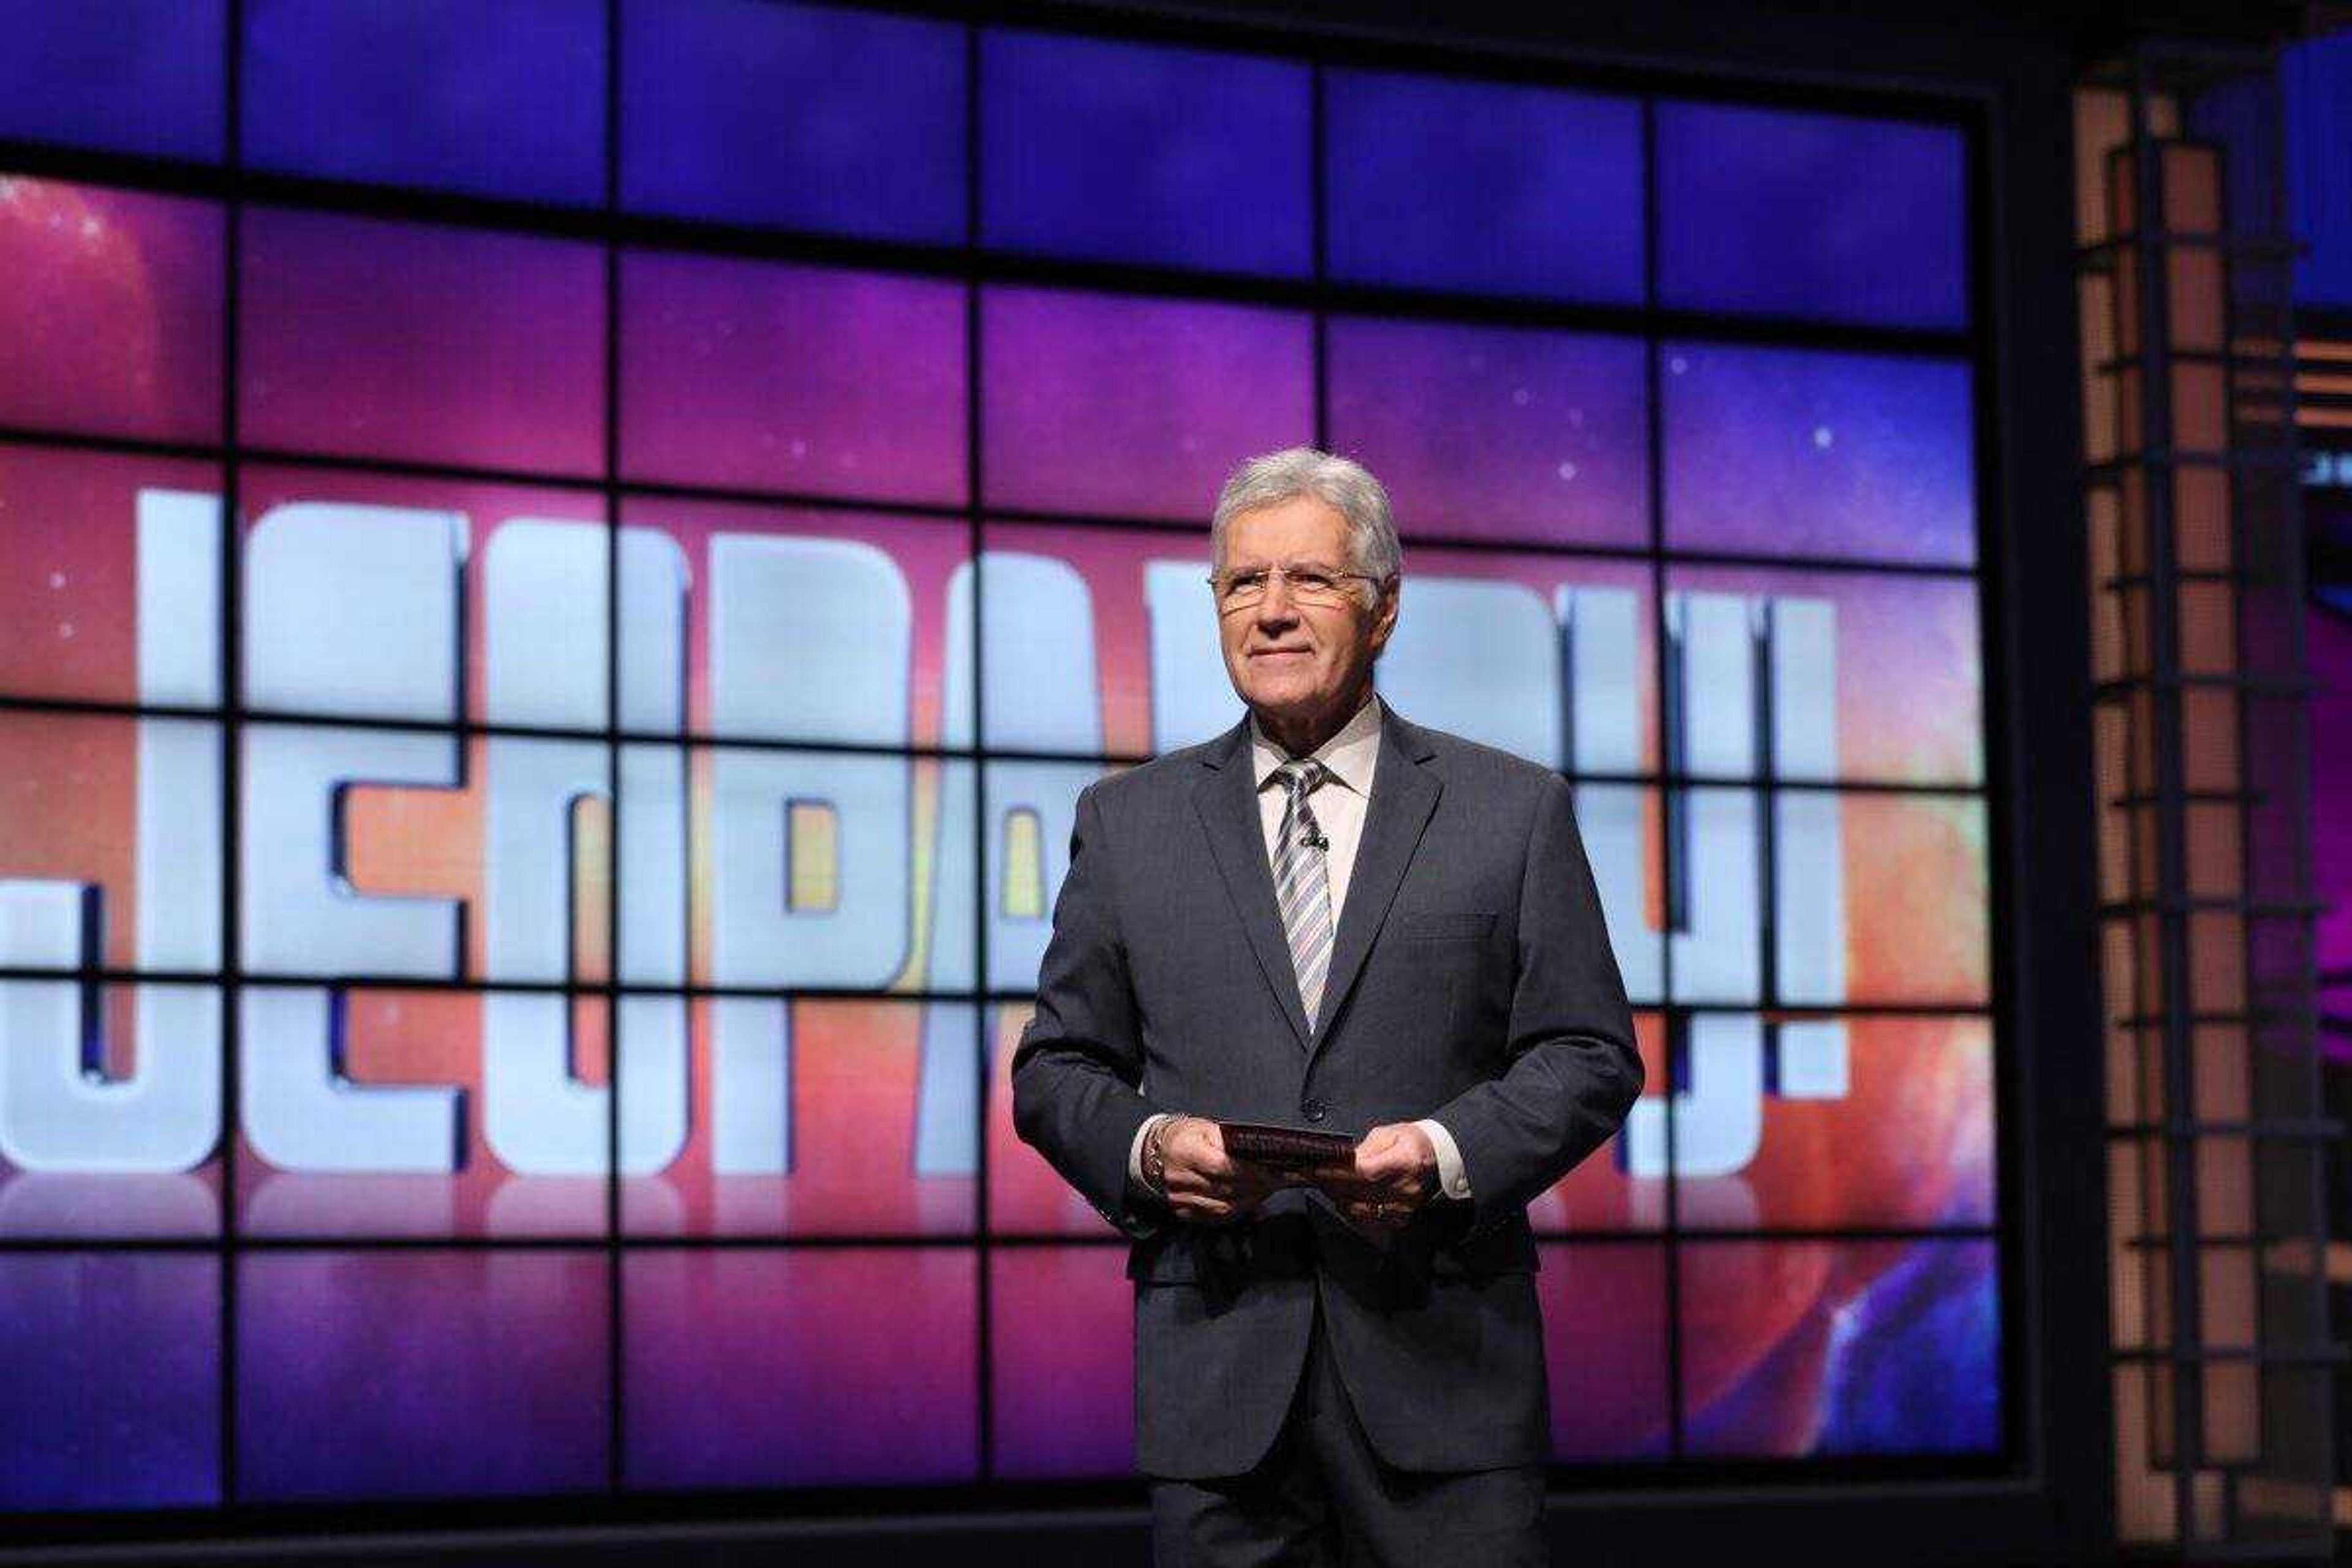 On Nov. 8, this photo of Alex Trebek was in a press release announcing Trebek’s death. In the photo, Trebek is preparing for another filming of the game show he hosted.